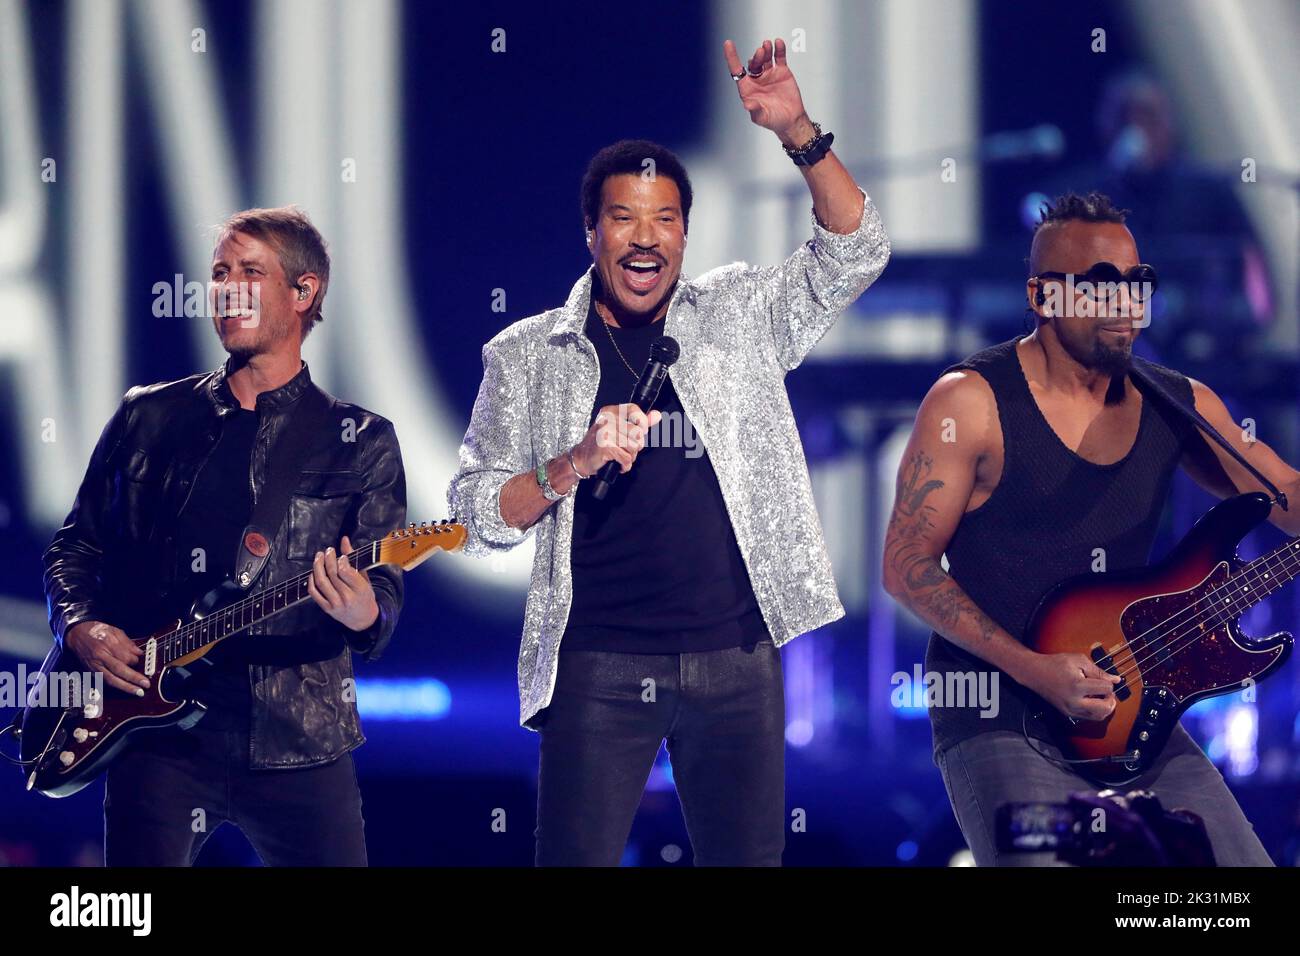 Lionel Richie performs during the first day of the iHeartRadio Music Festival 2022 at T-Mobile Arena in Las Vegas, Nevada, U.S. September 23, 2022. REUTERS/Steve Marcus Stock Photo